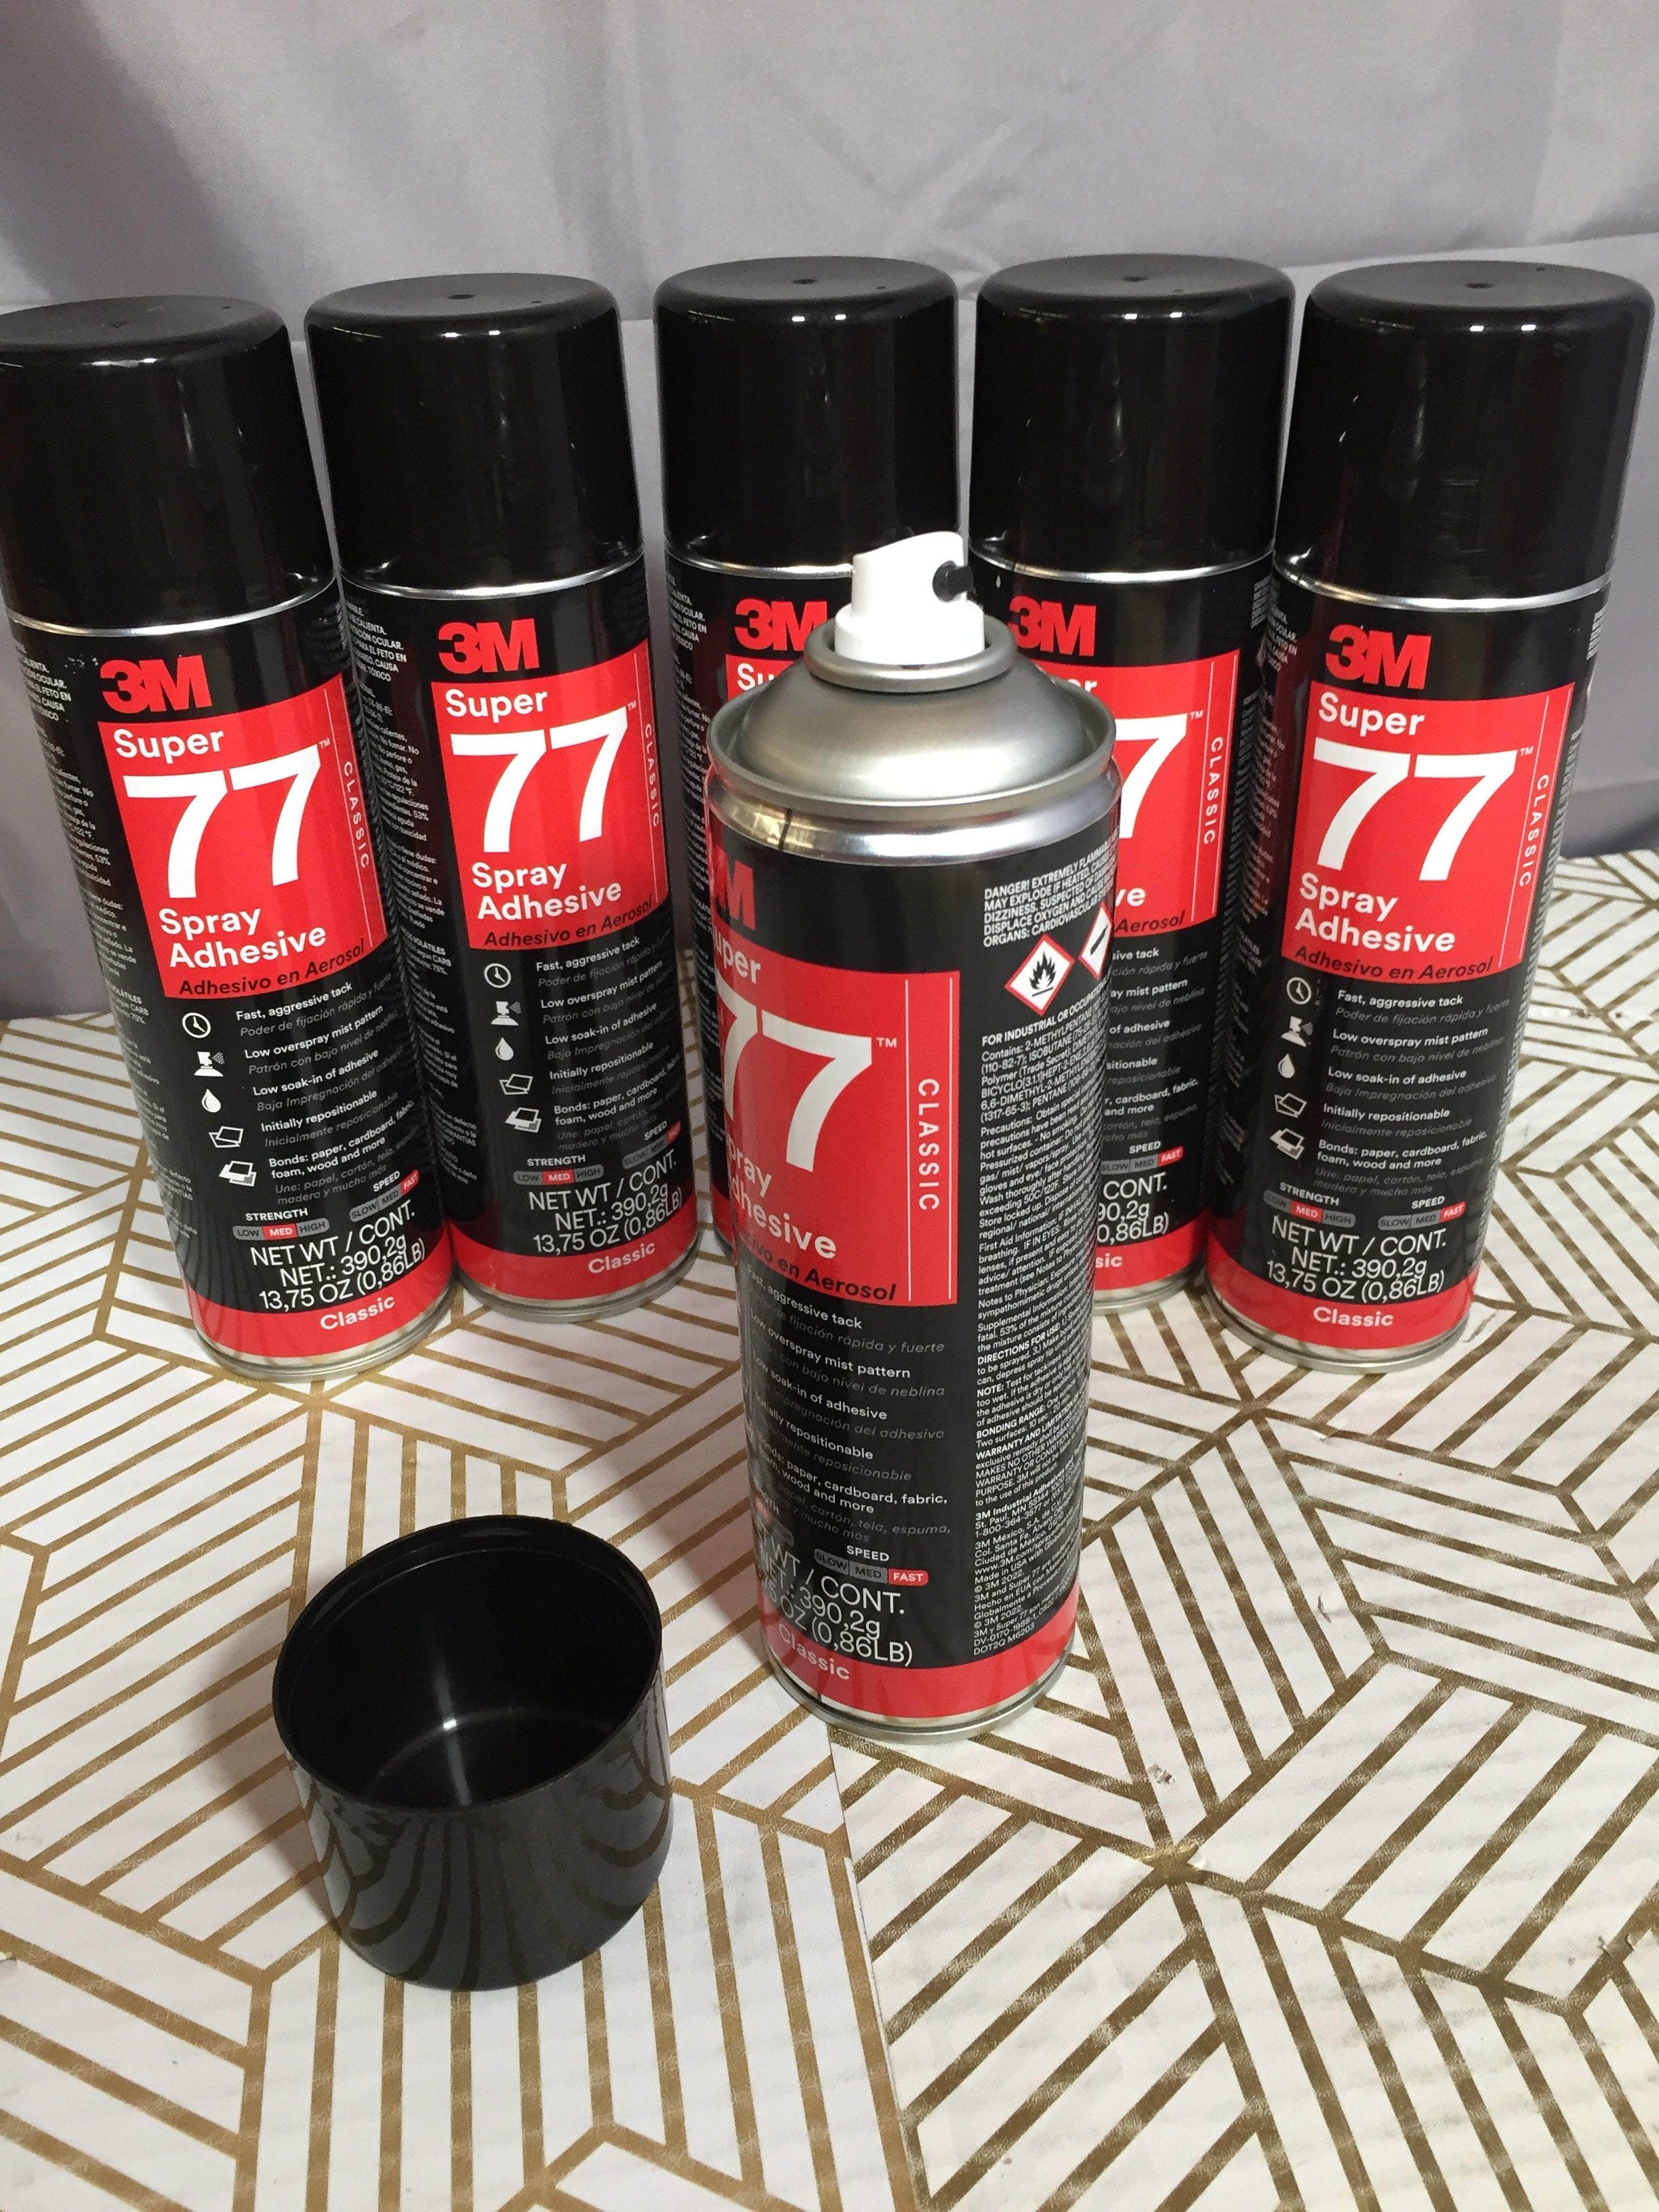 3M SUPER 77 Spray Adhesive Classic | 6 CANS | **EXPIRED** (8201341173998)